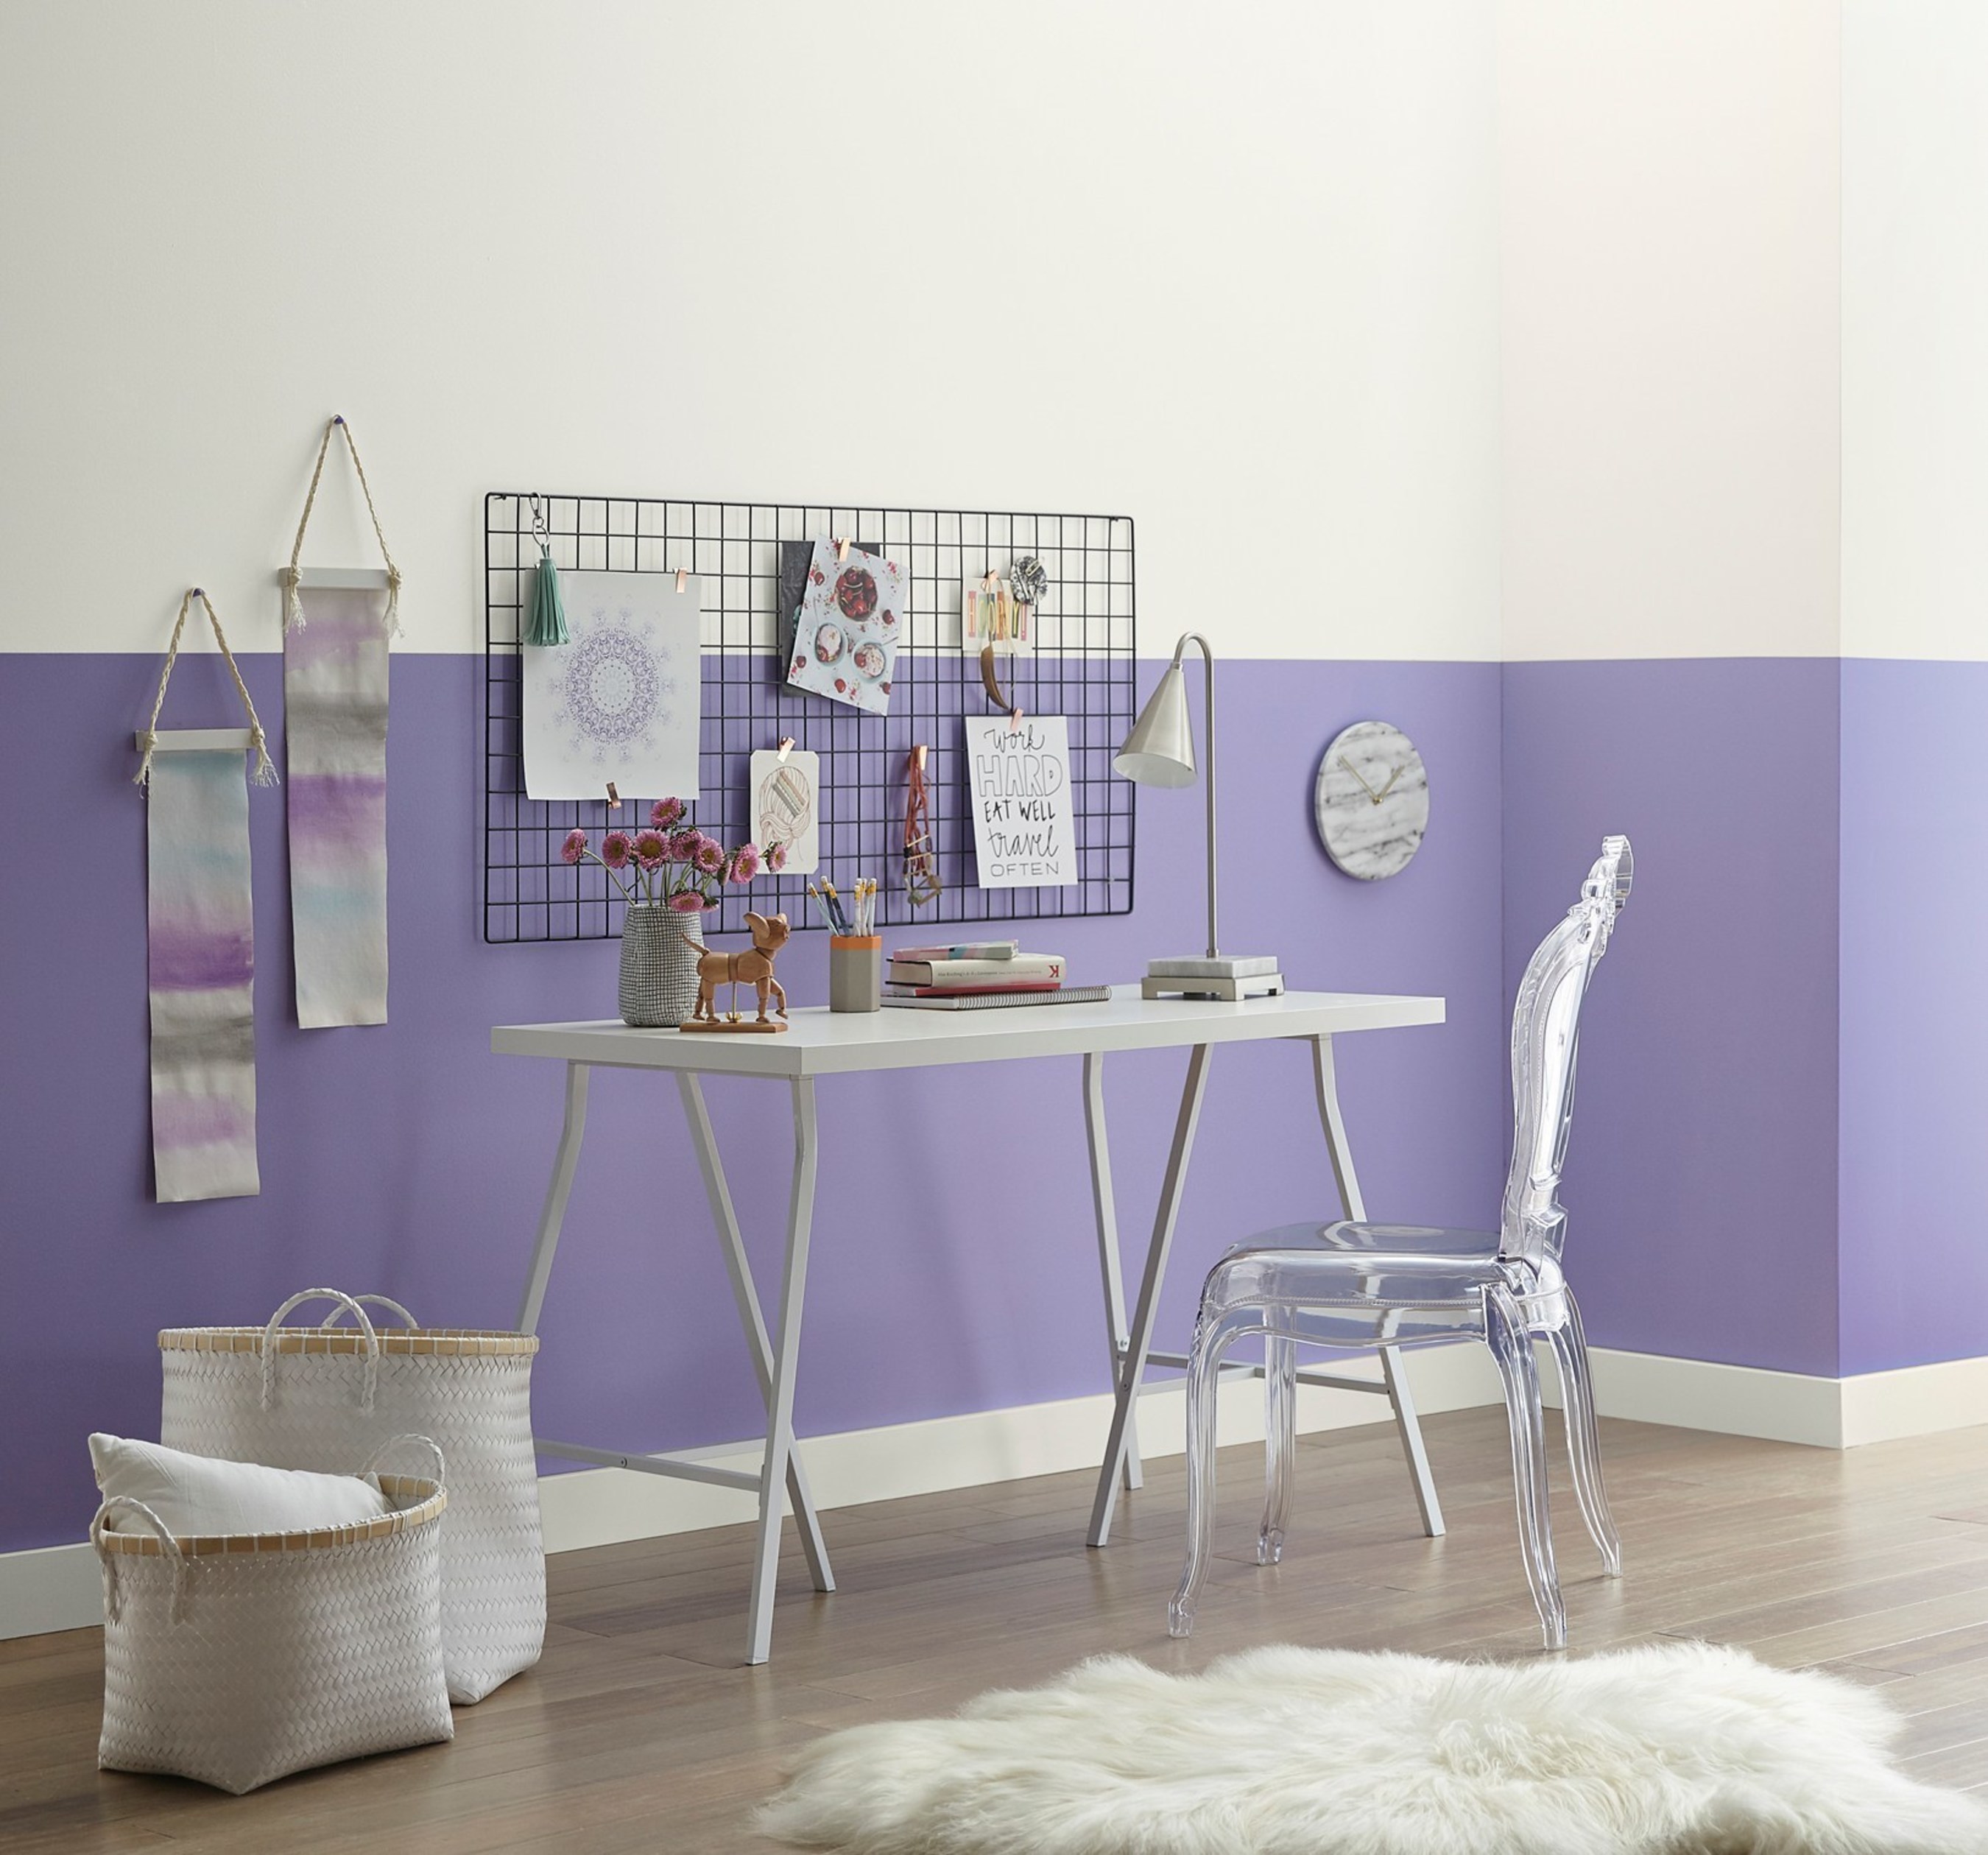 Lowe's: 4002-8A Sweet Violet/ Ace: VR058C Safe Haven/ Independent Retailers: V037-2 Safe Haven/  A modern blue violet emerges capturing the free-spirited nature of nomadic work styles enabled by technology and embraced by a generation placing less importance on roots, and instead focusing on experiences. This hue is energizing and expressive. "Part trustworthy blue, part mysterious violet - you might see a bit of both in this hue depending on the time of day," said Kim.